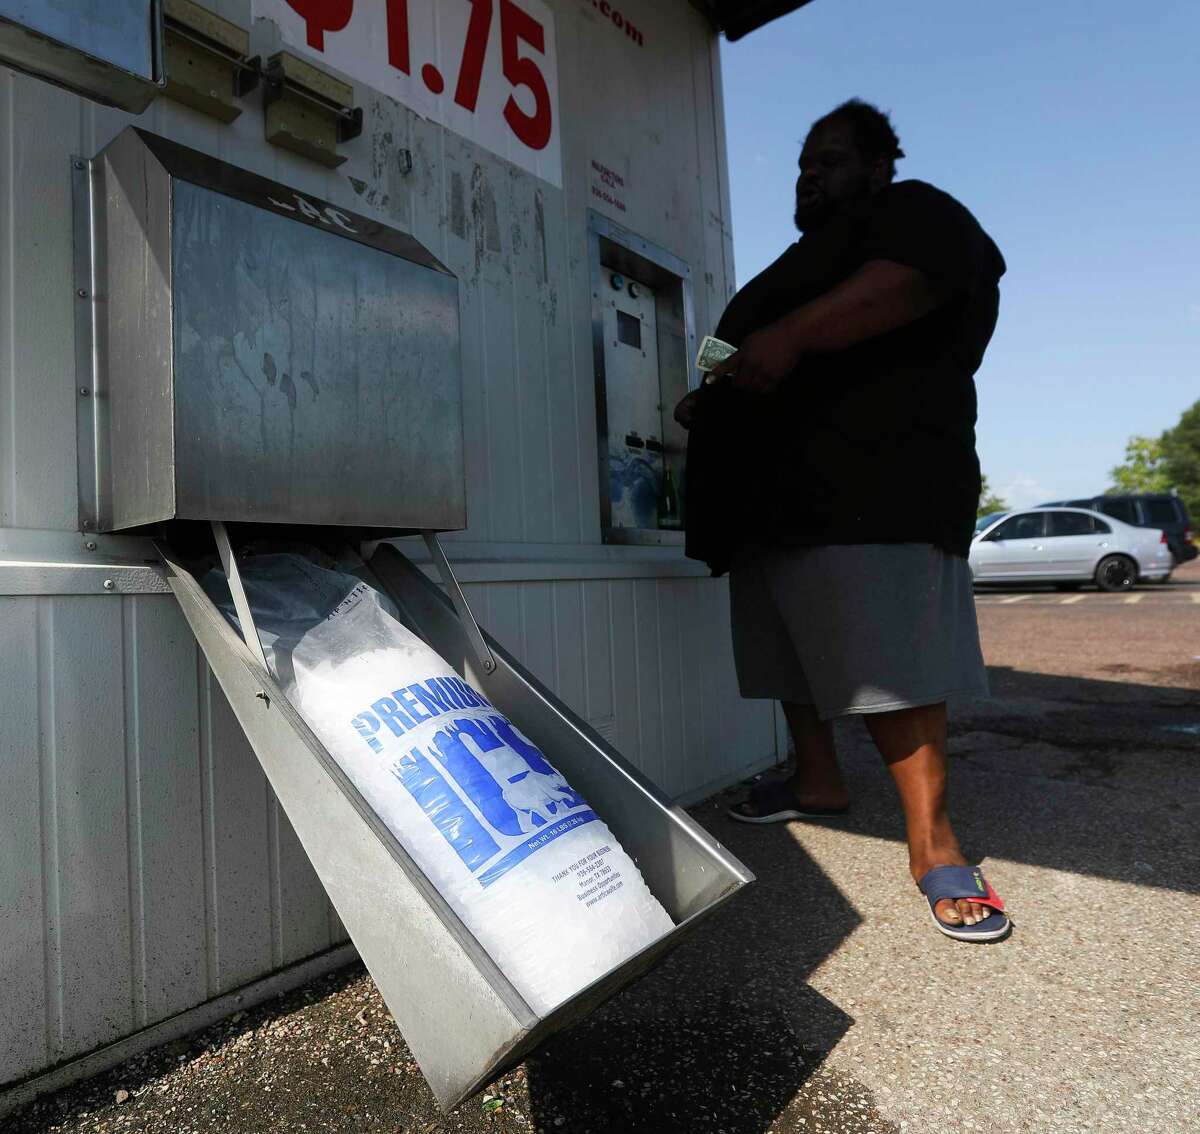 Jerlon Barbar gets ice from a dispenser, Tuesday, July 12, 2022, in Conroe. Conroe reached 105 degrees on Sunday and 103 degrees on Monday and forecasters say temperatures around 100 remain likely for Tuesday and Wednesday under sunny skies. Thursday and Friday may be slightly cooler, with highs in the mid-90s. The weekend forecast calls for highs somewhere in the mid-90s with scant rain chances under mostly sunny skies.